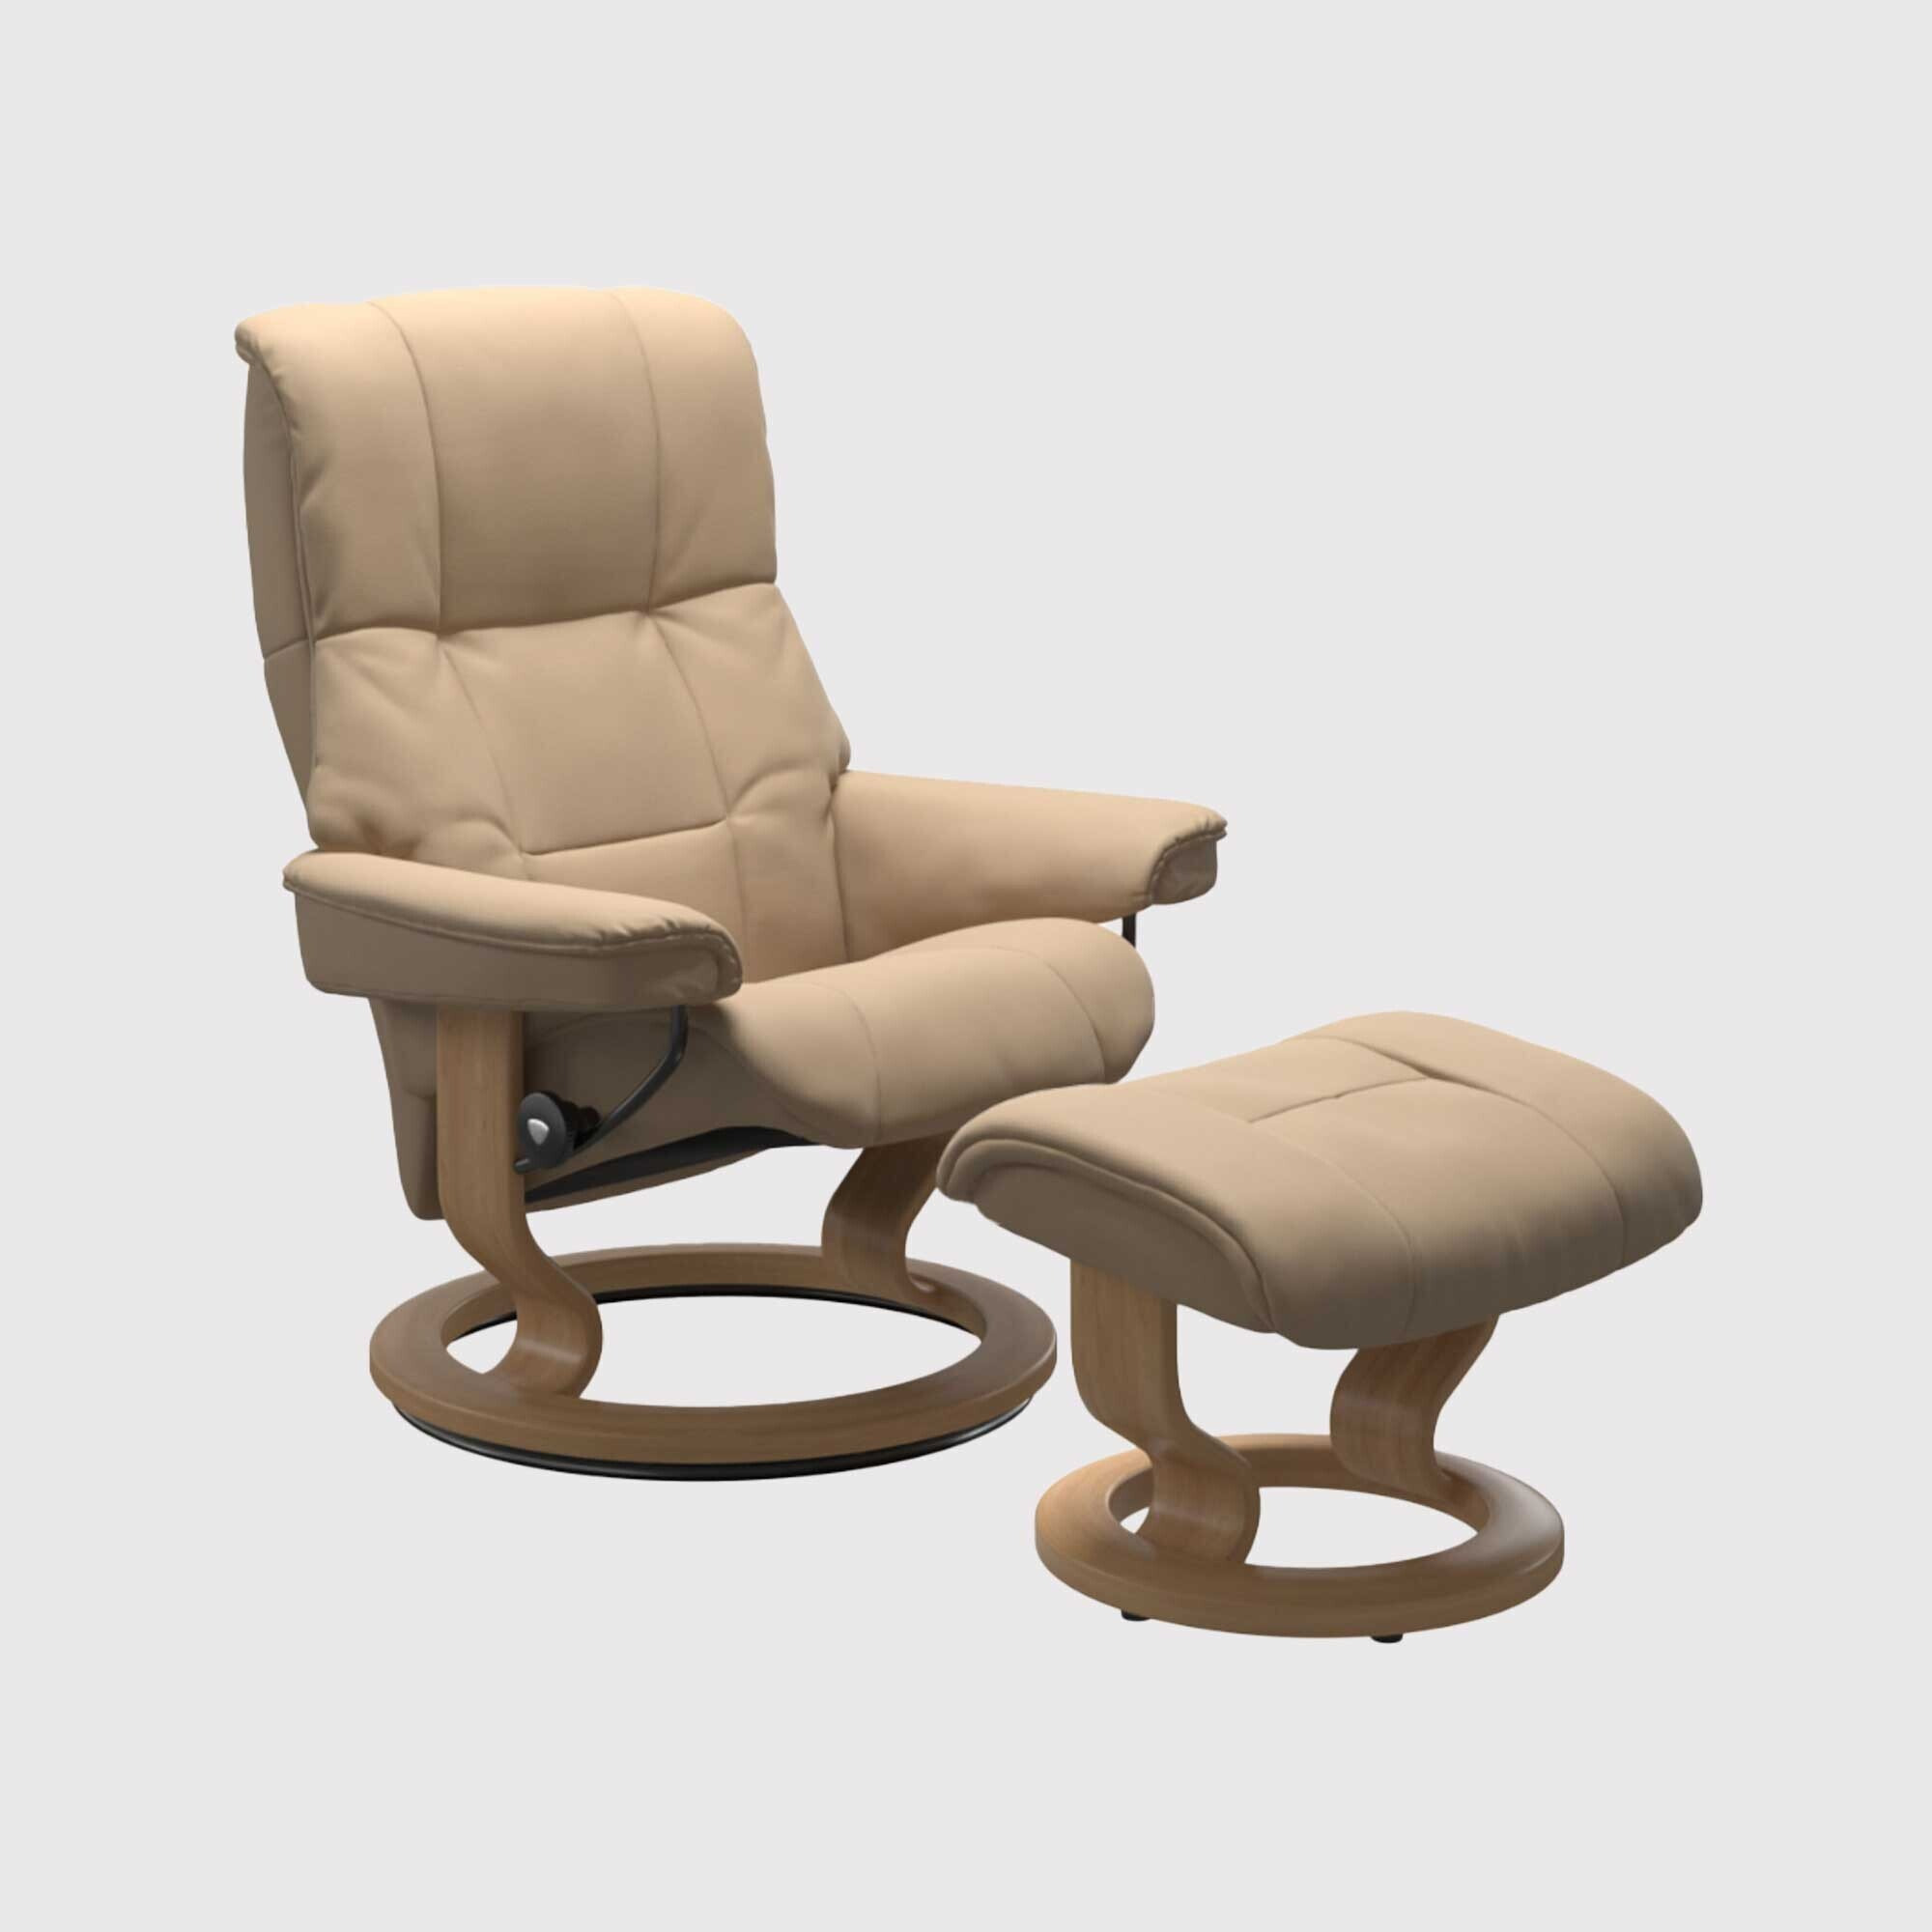 Stressless Mayfair Medium Classic Recliner Chair w/footstool, Neutral Leather - Barker & Stonehouse - image 1